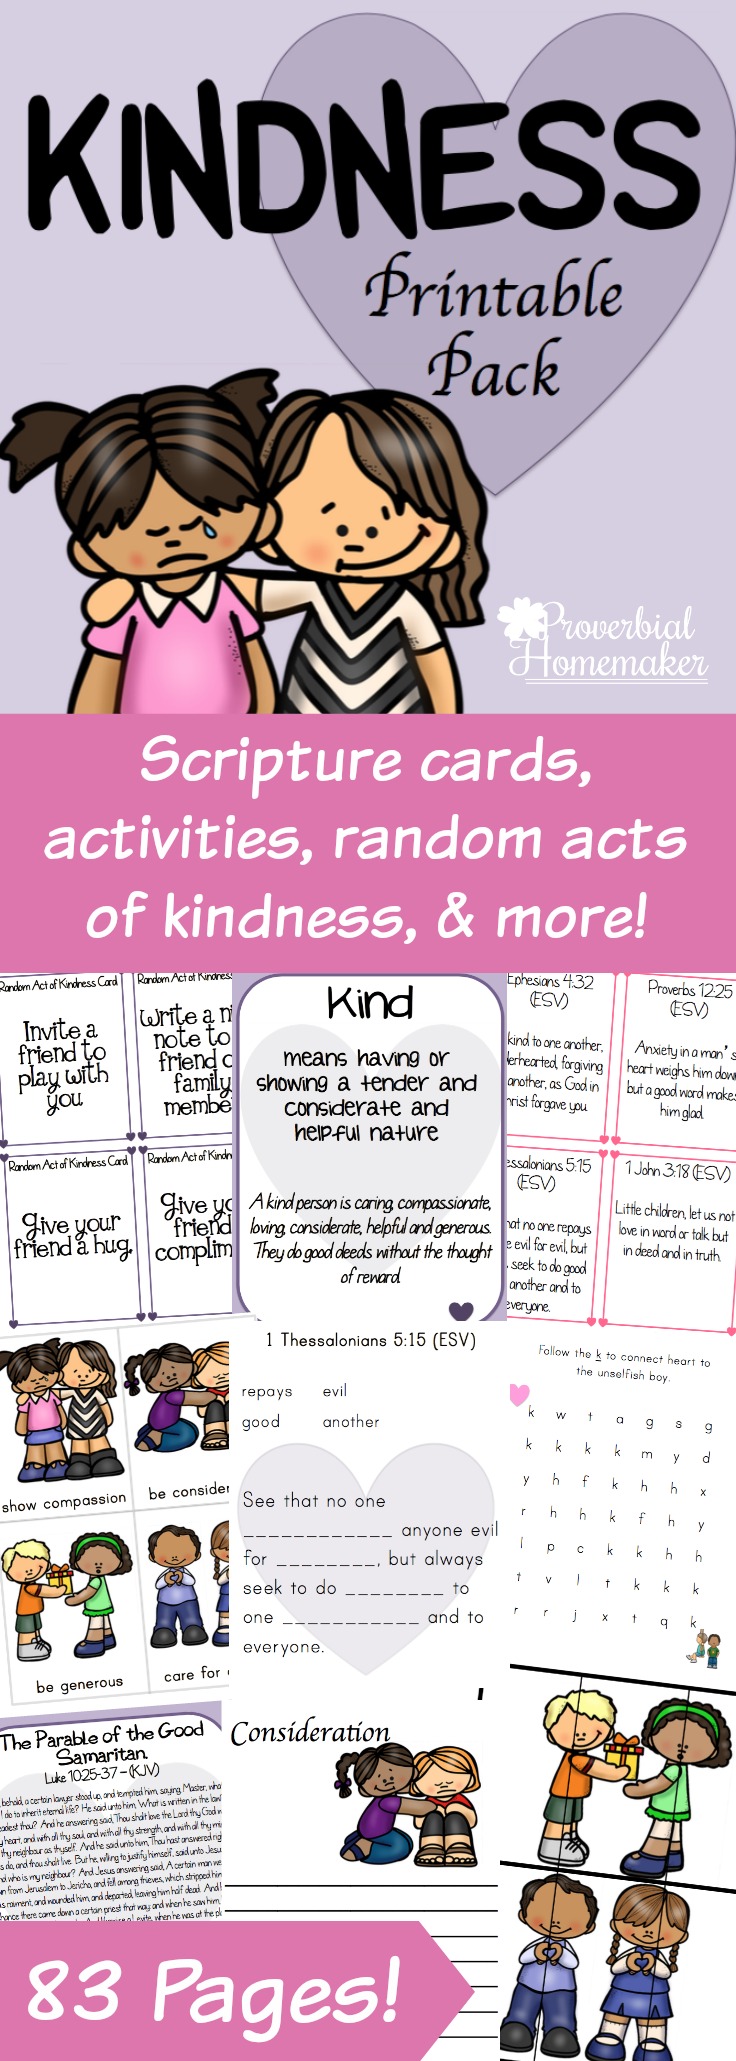 Teach kids kindness with this kindness printable pack! Includes scripture cards, random acts of kindness, learning activities, and more!